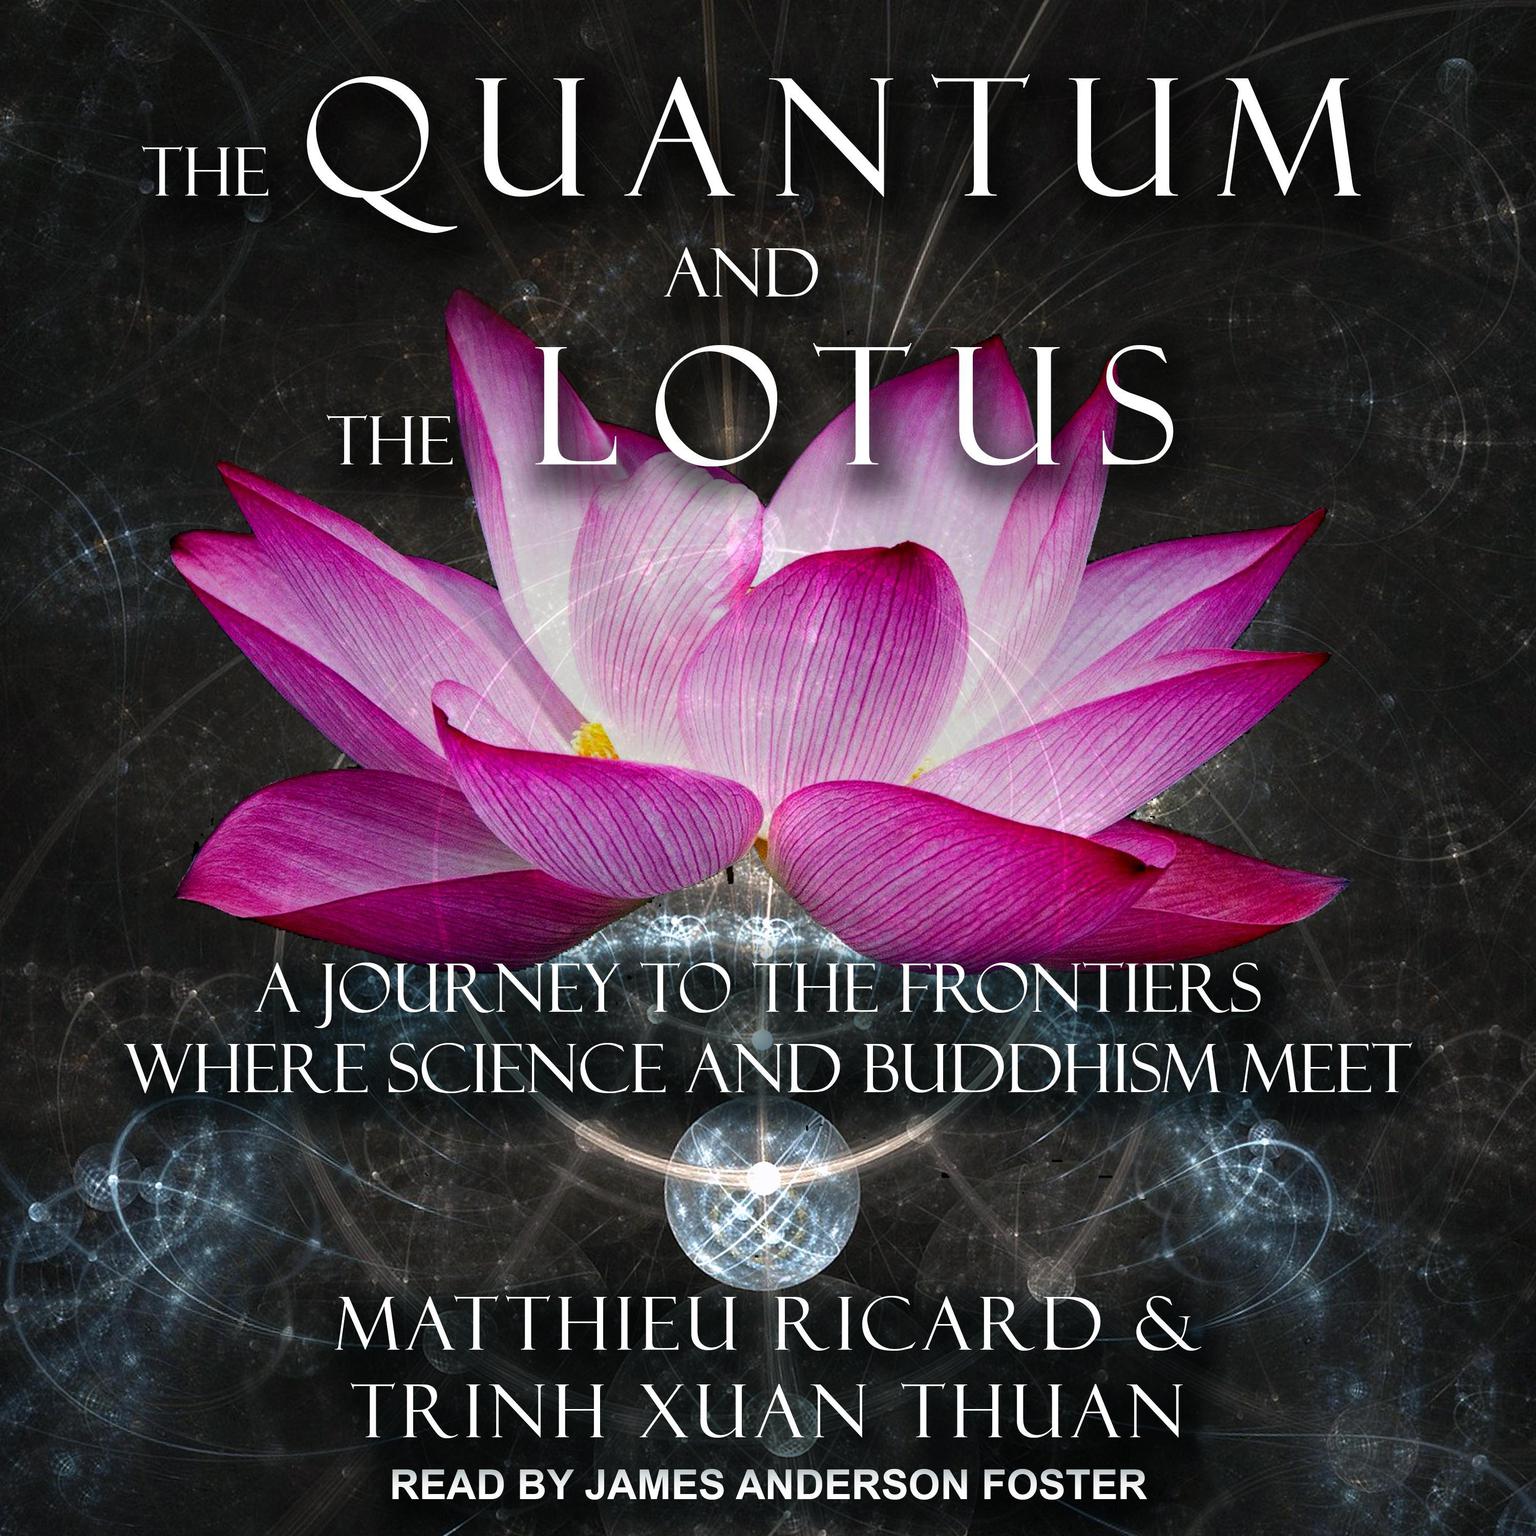 The Quantum and the Lotus: A Journey to the Frontiers Where Science and Buddhism Meet Audiobook, by Matthieu Ricard